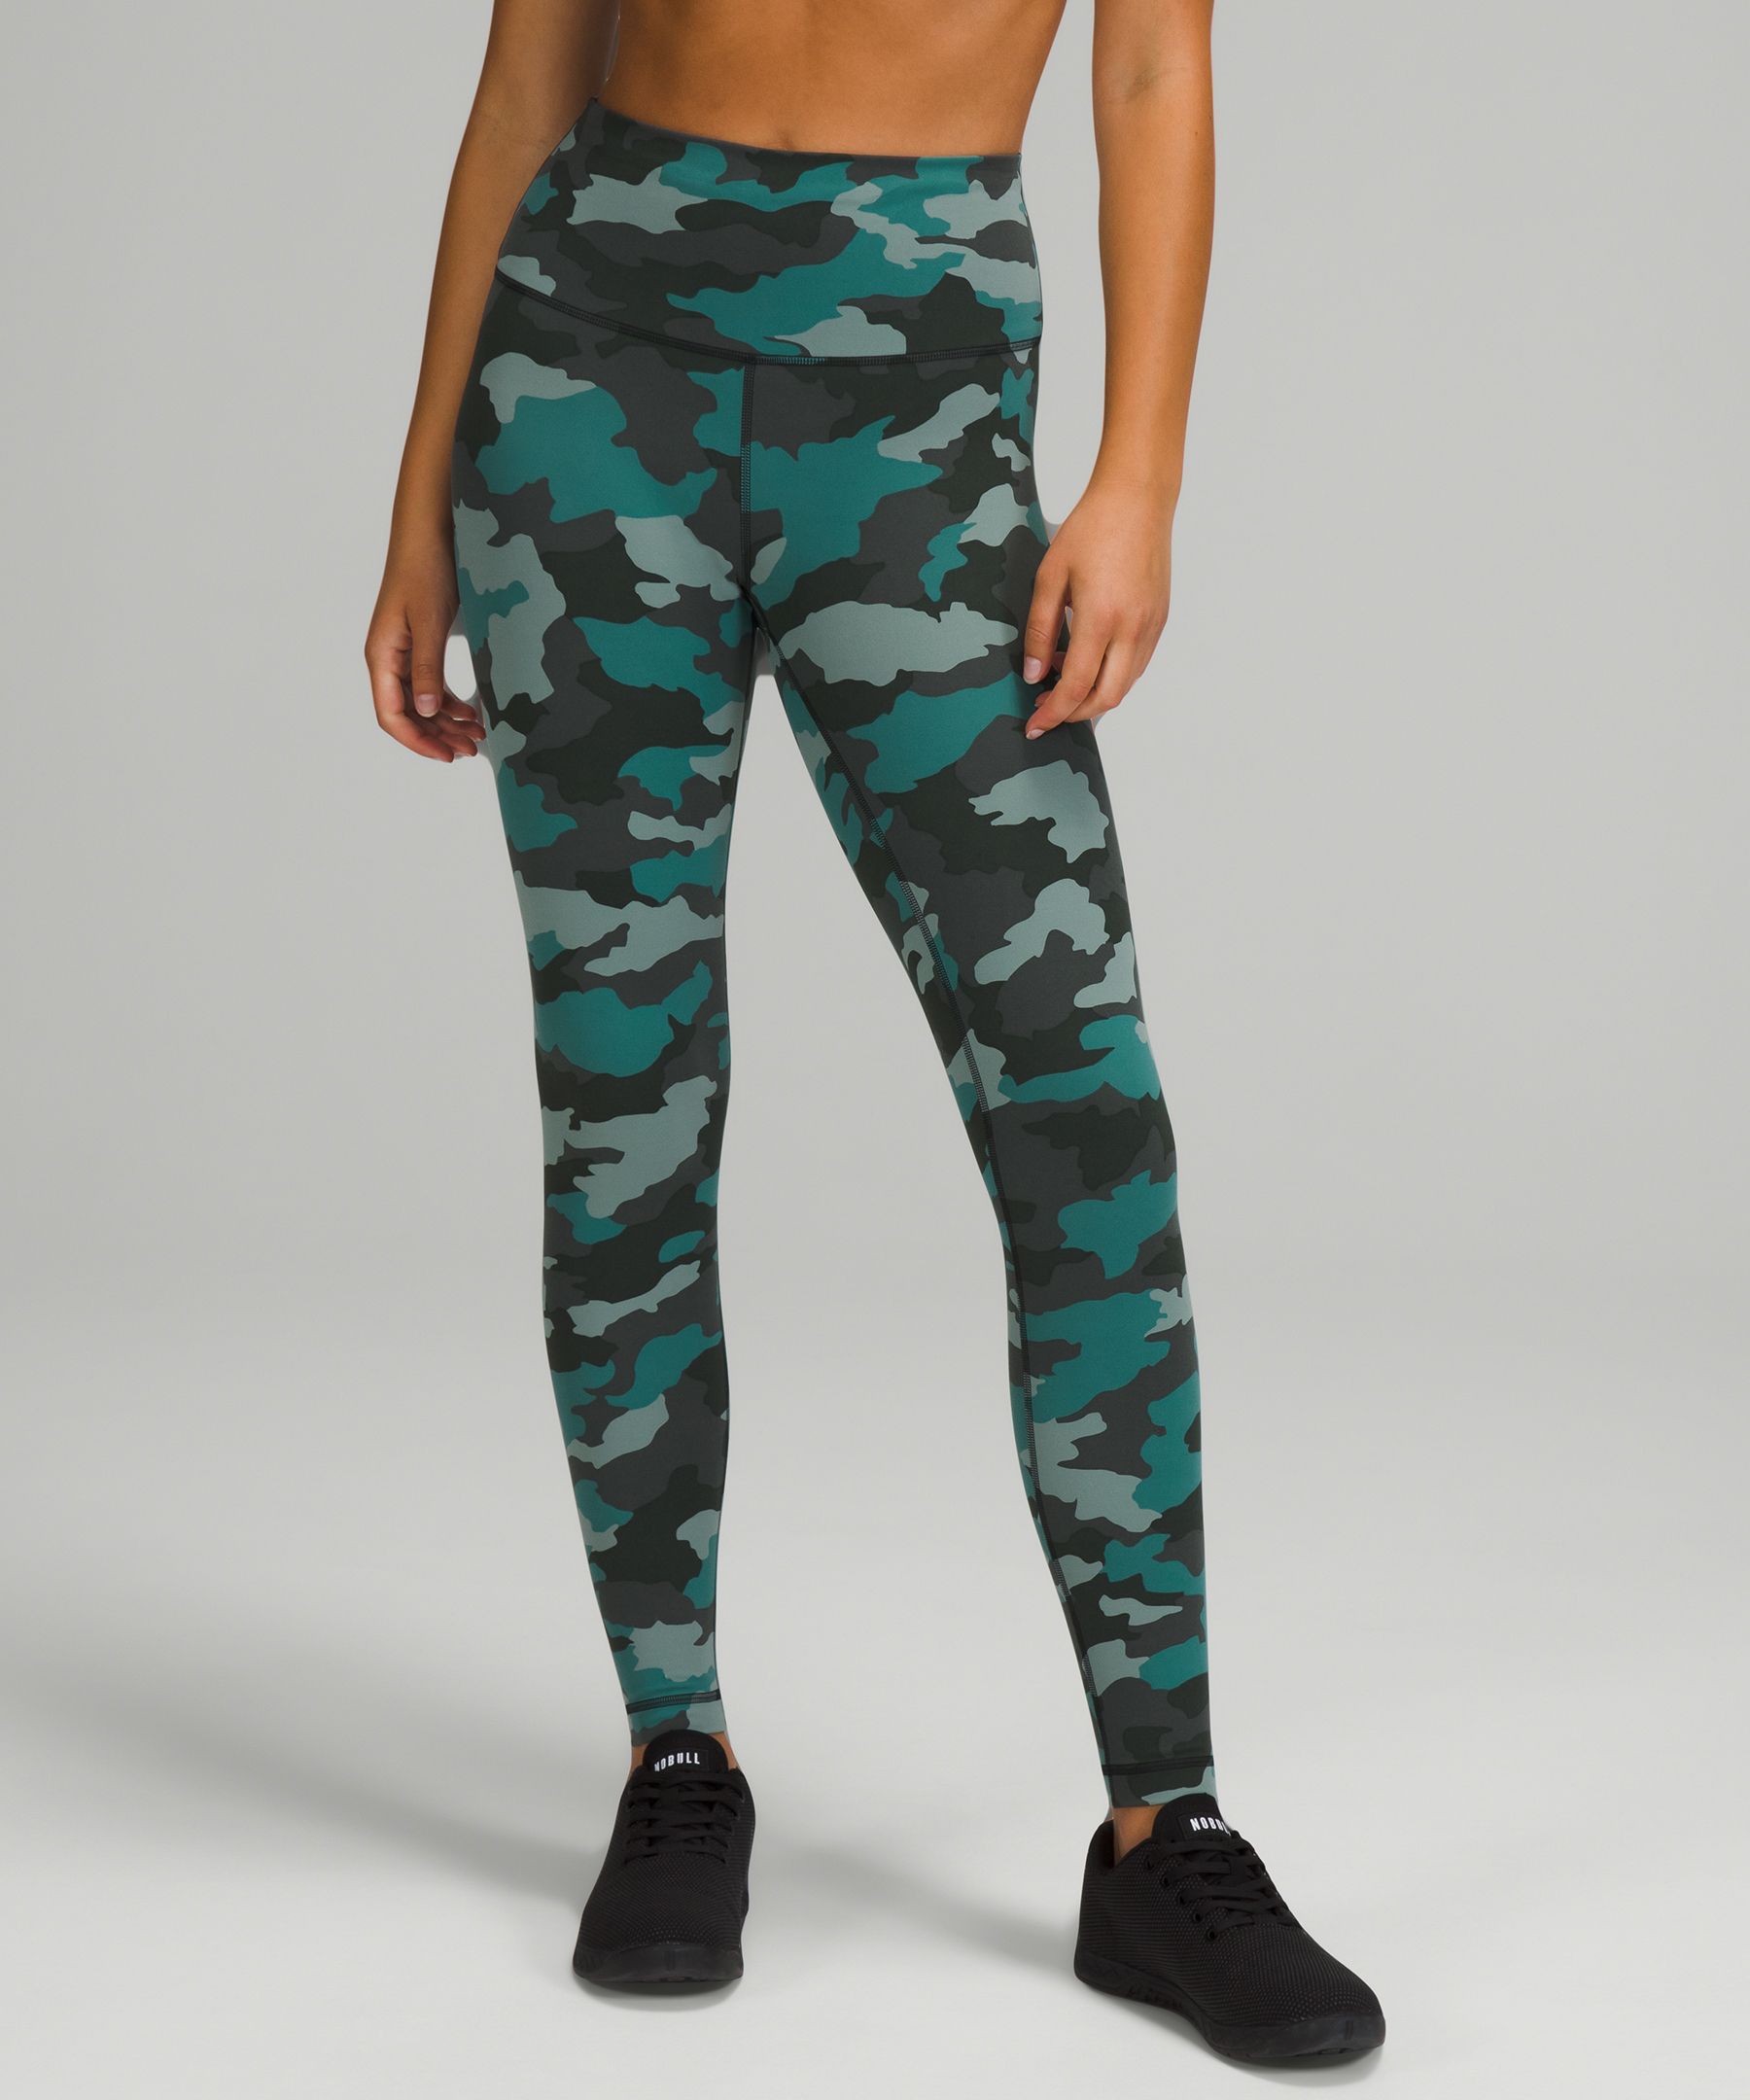 Lululemon Wunder Train High-rise Tights 28" In Heritage 365 Camo Tidewater Teal